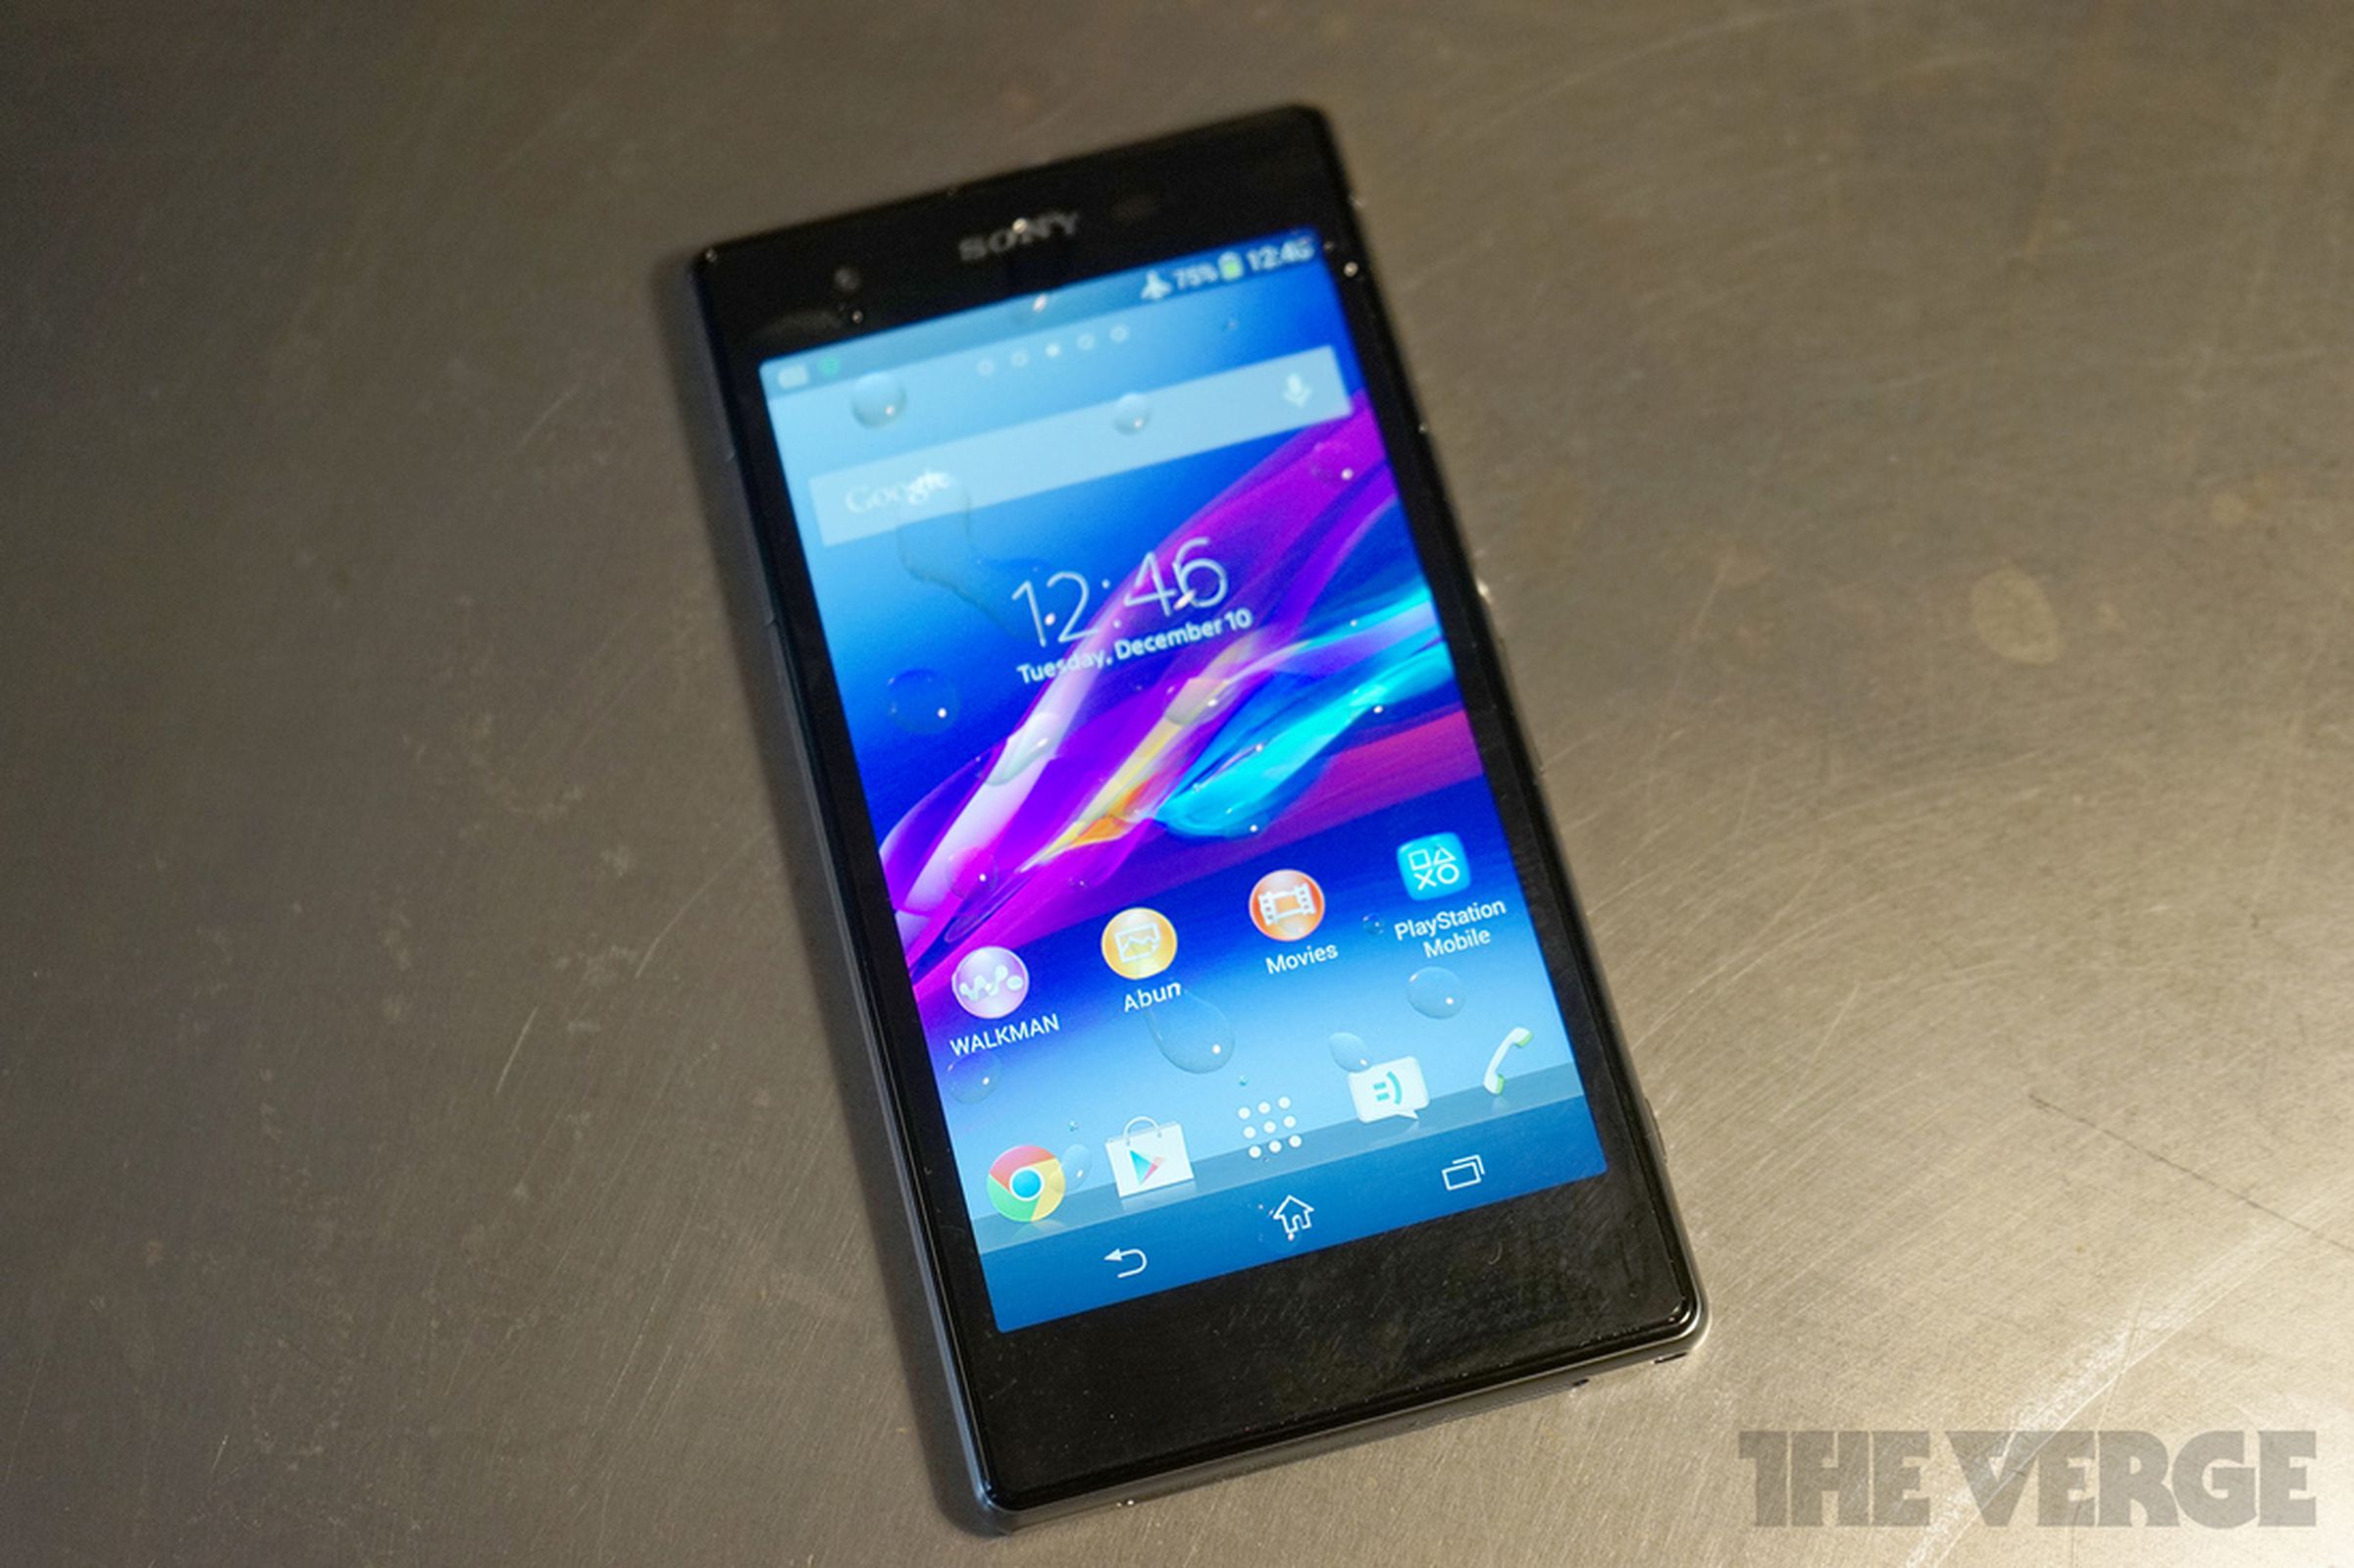 Sony Xperia Z1S for T-Mobile hands-on pictures